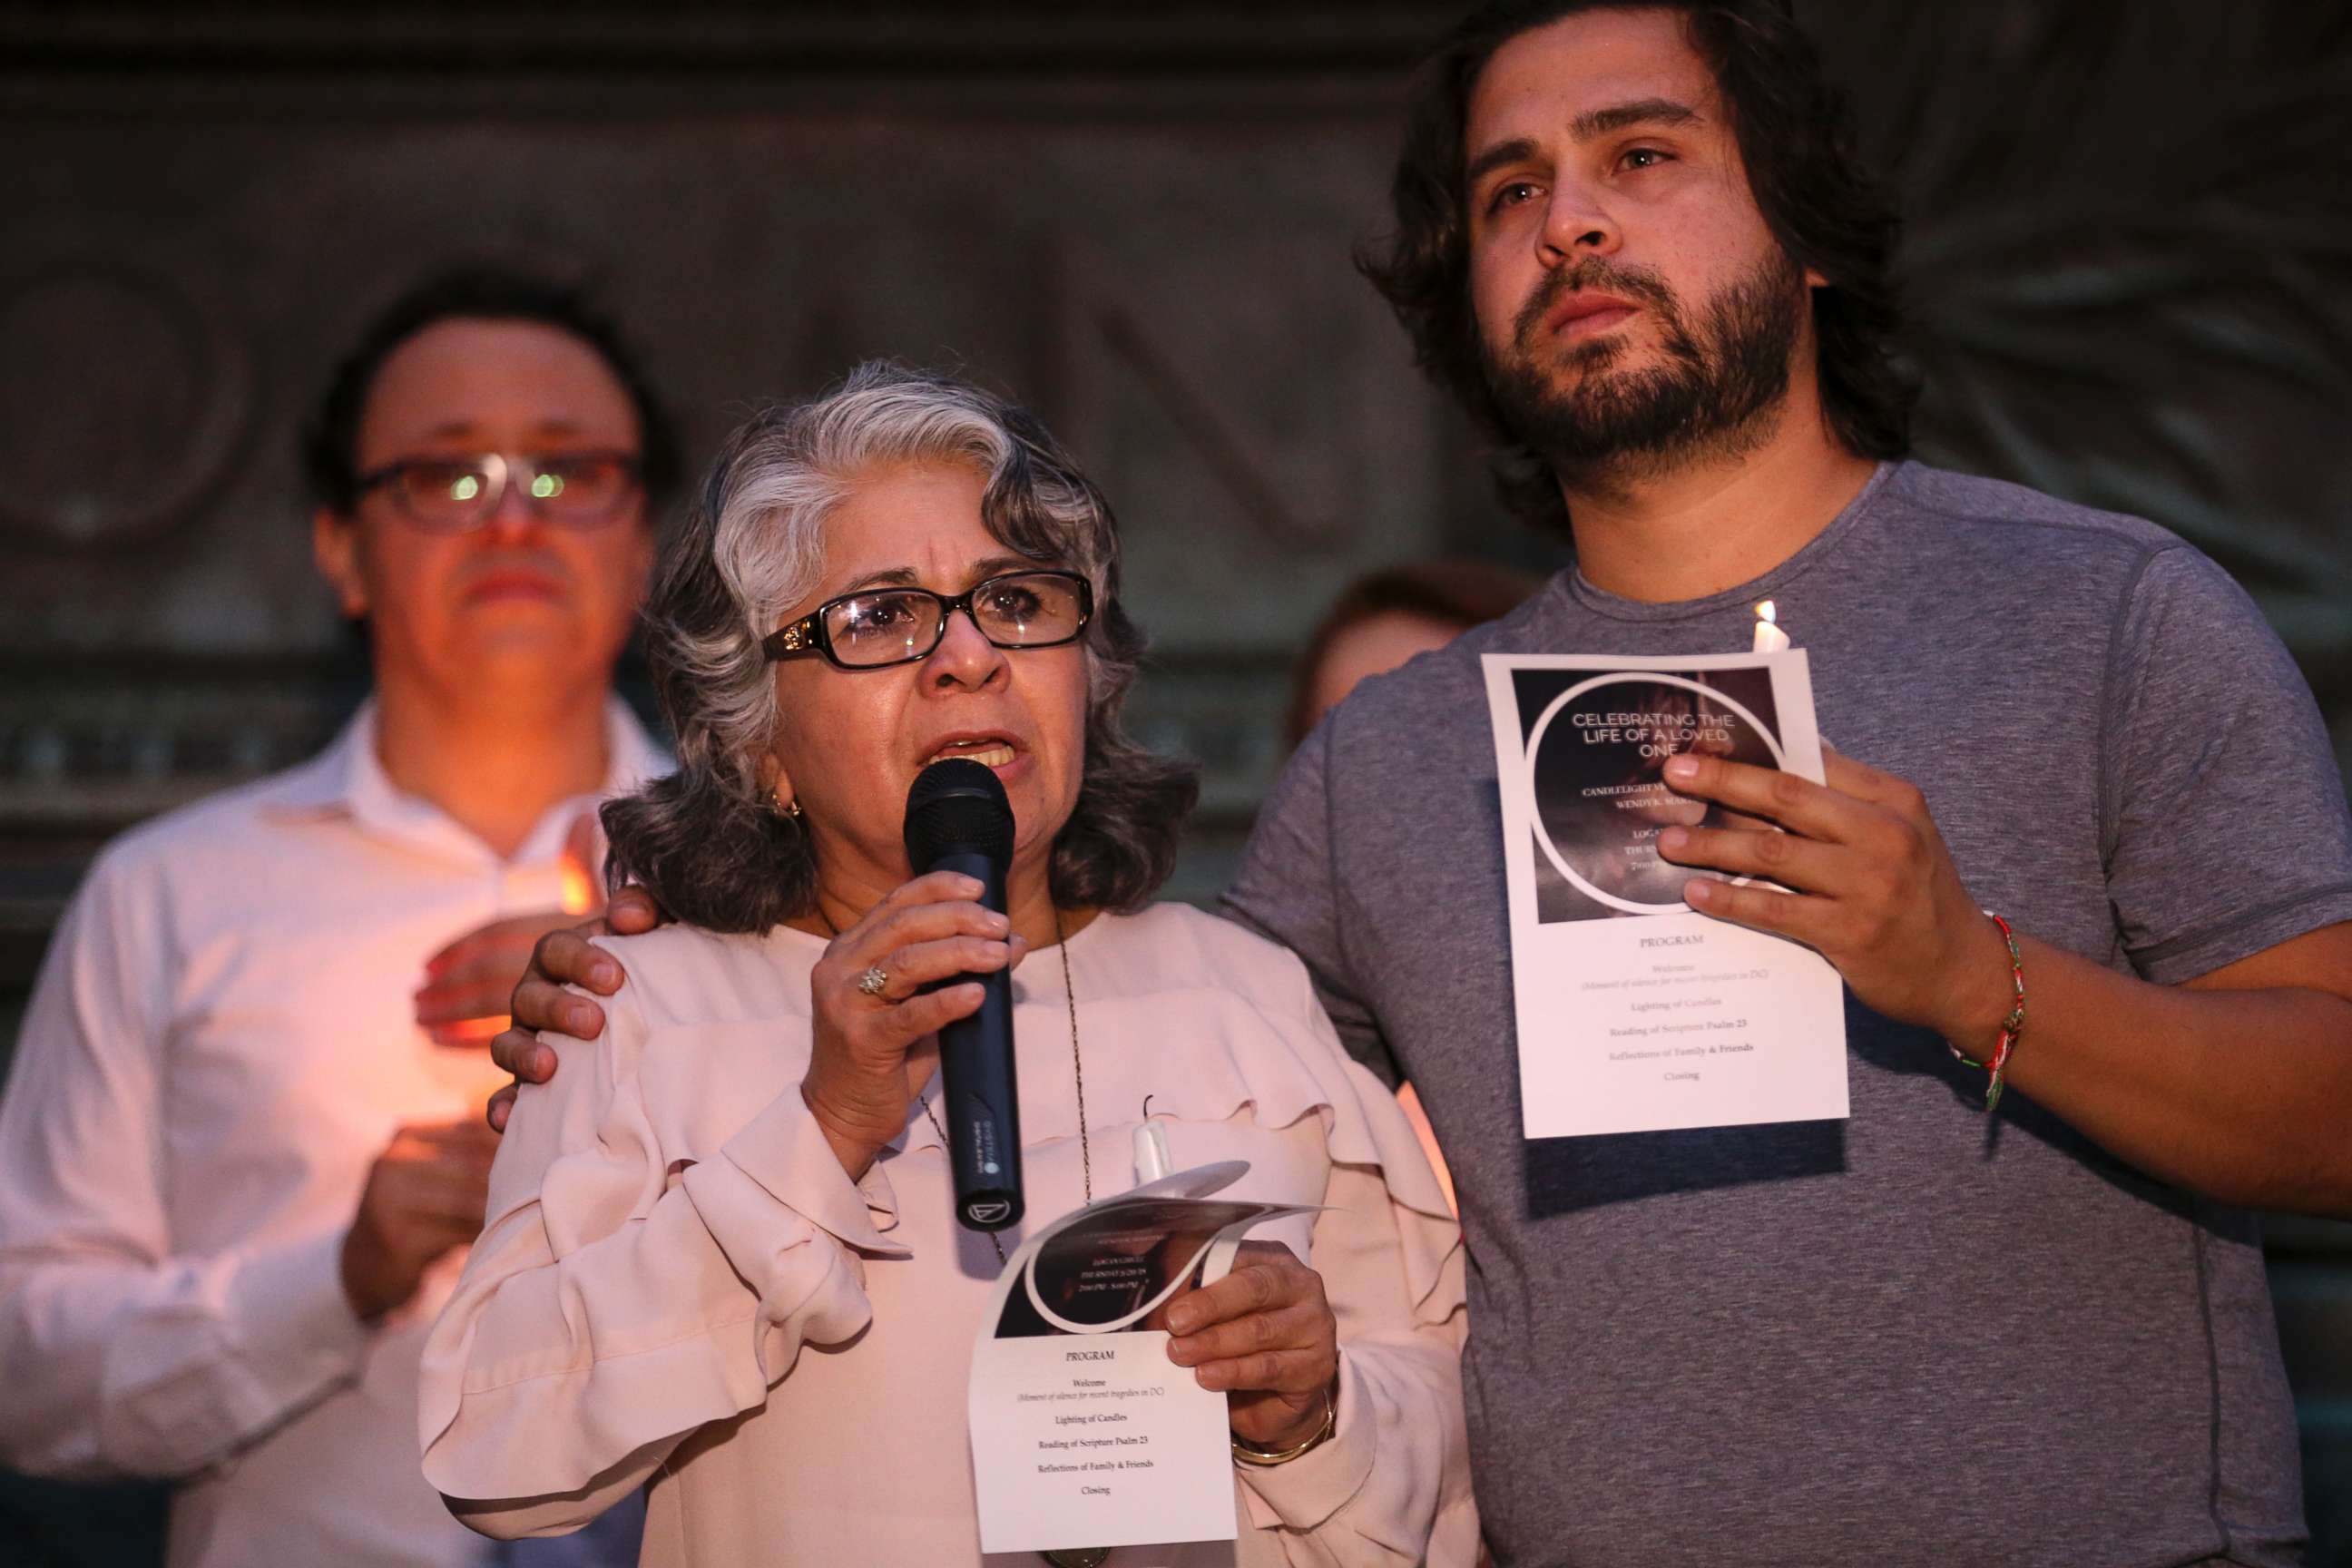 PHOTO: Cora Martinez, the mother of Wendy Matinez who was killed in Washington while jogging, speaks during a candlelight vigil in her daughter's honor on Sept. 20, 2018 in Washington.